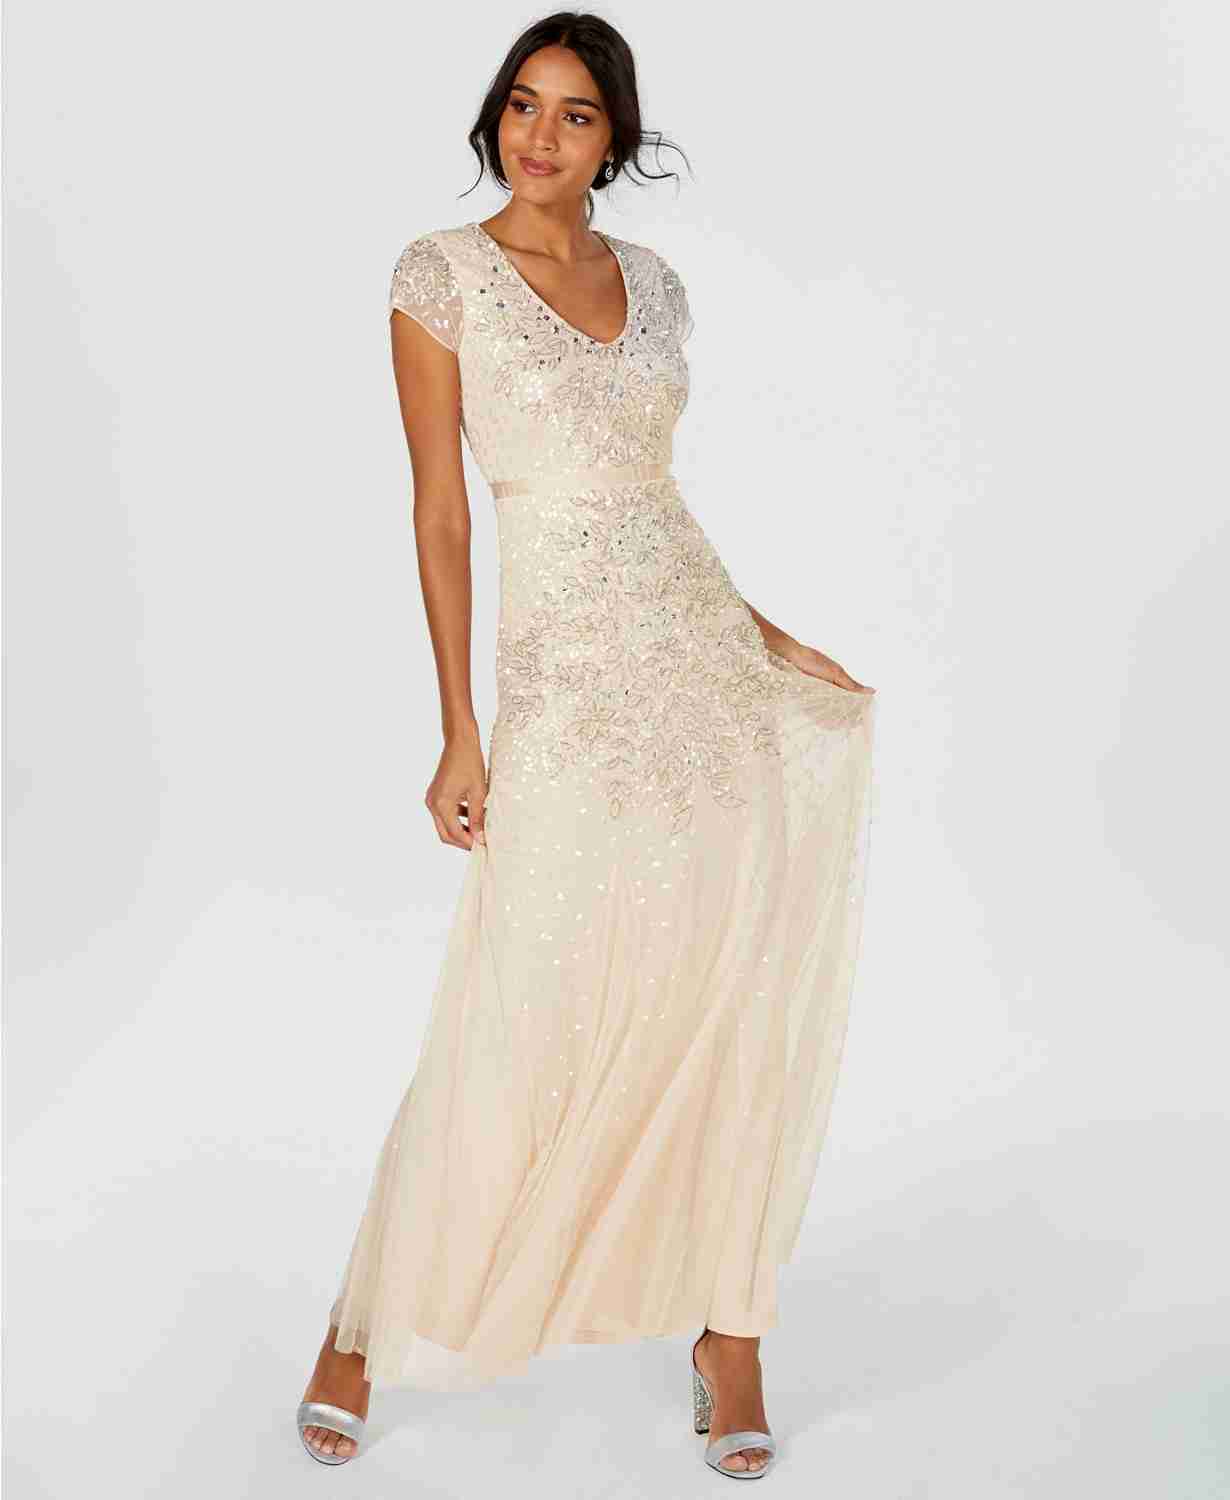 Gorgeous sequined and beaded Adrianna Papell modest prom dress.